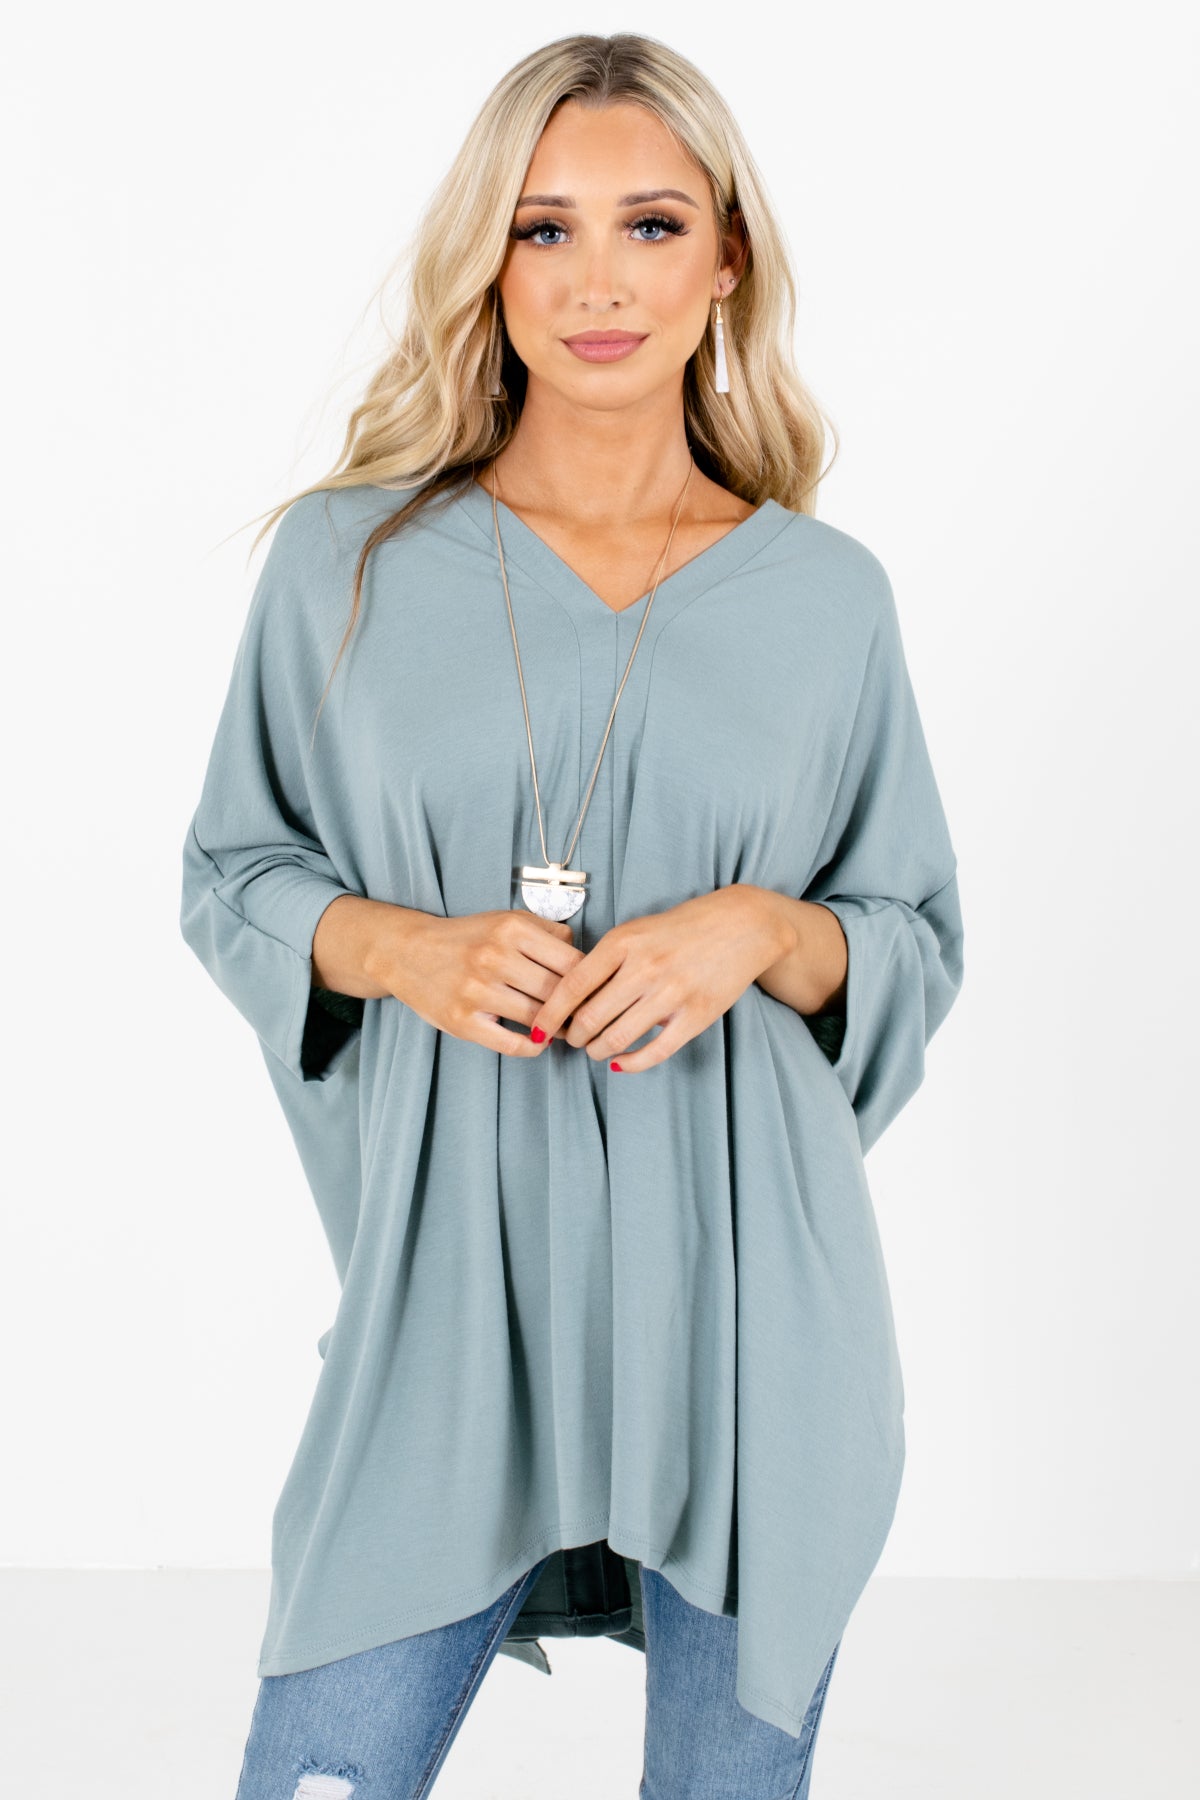 Poncho Style Boutique Top For Women in Blue-Green.